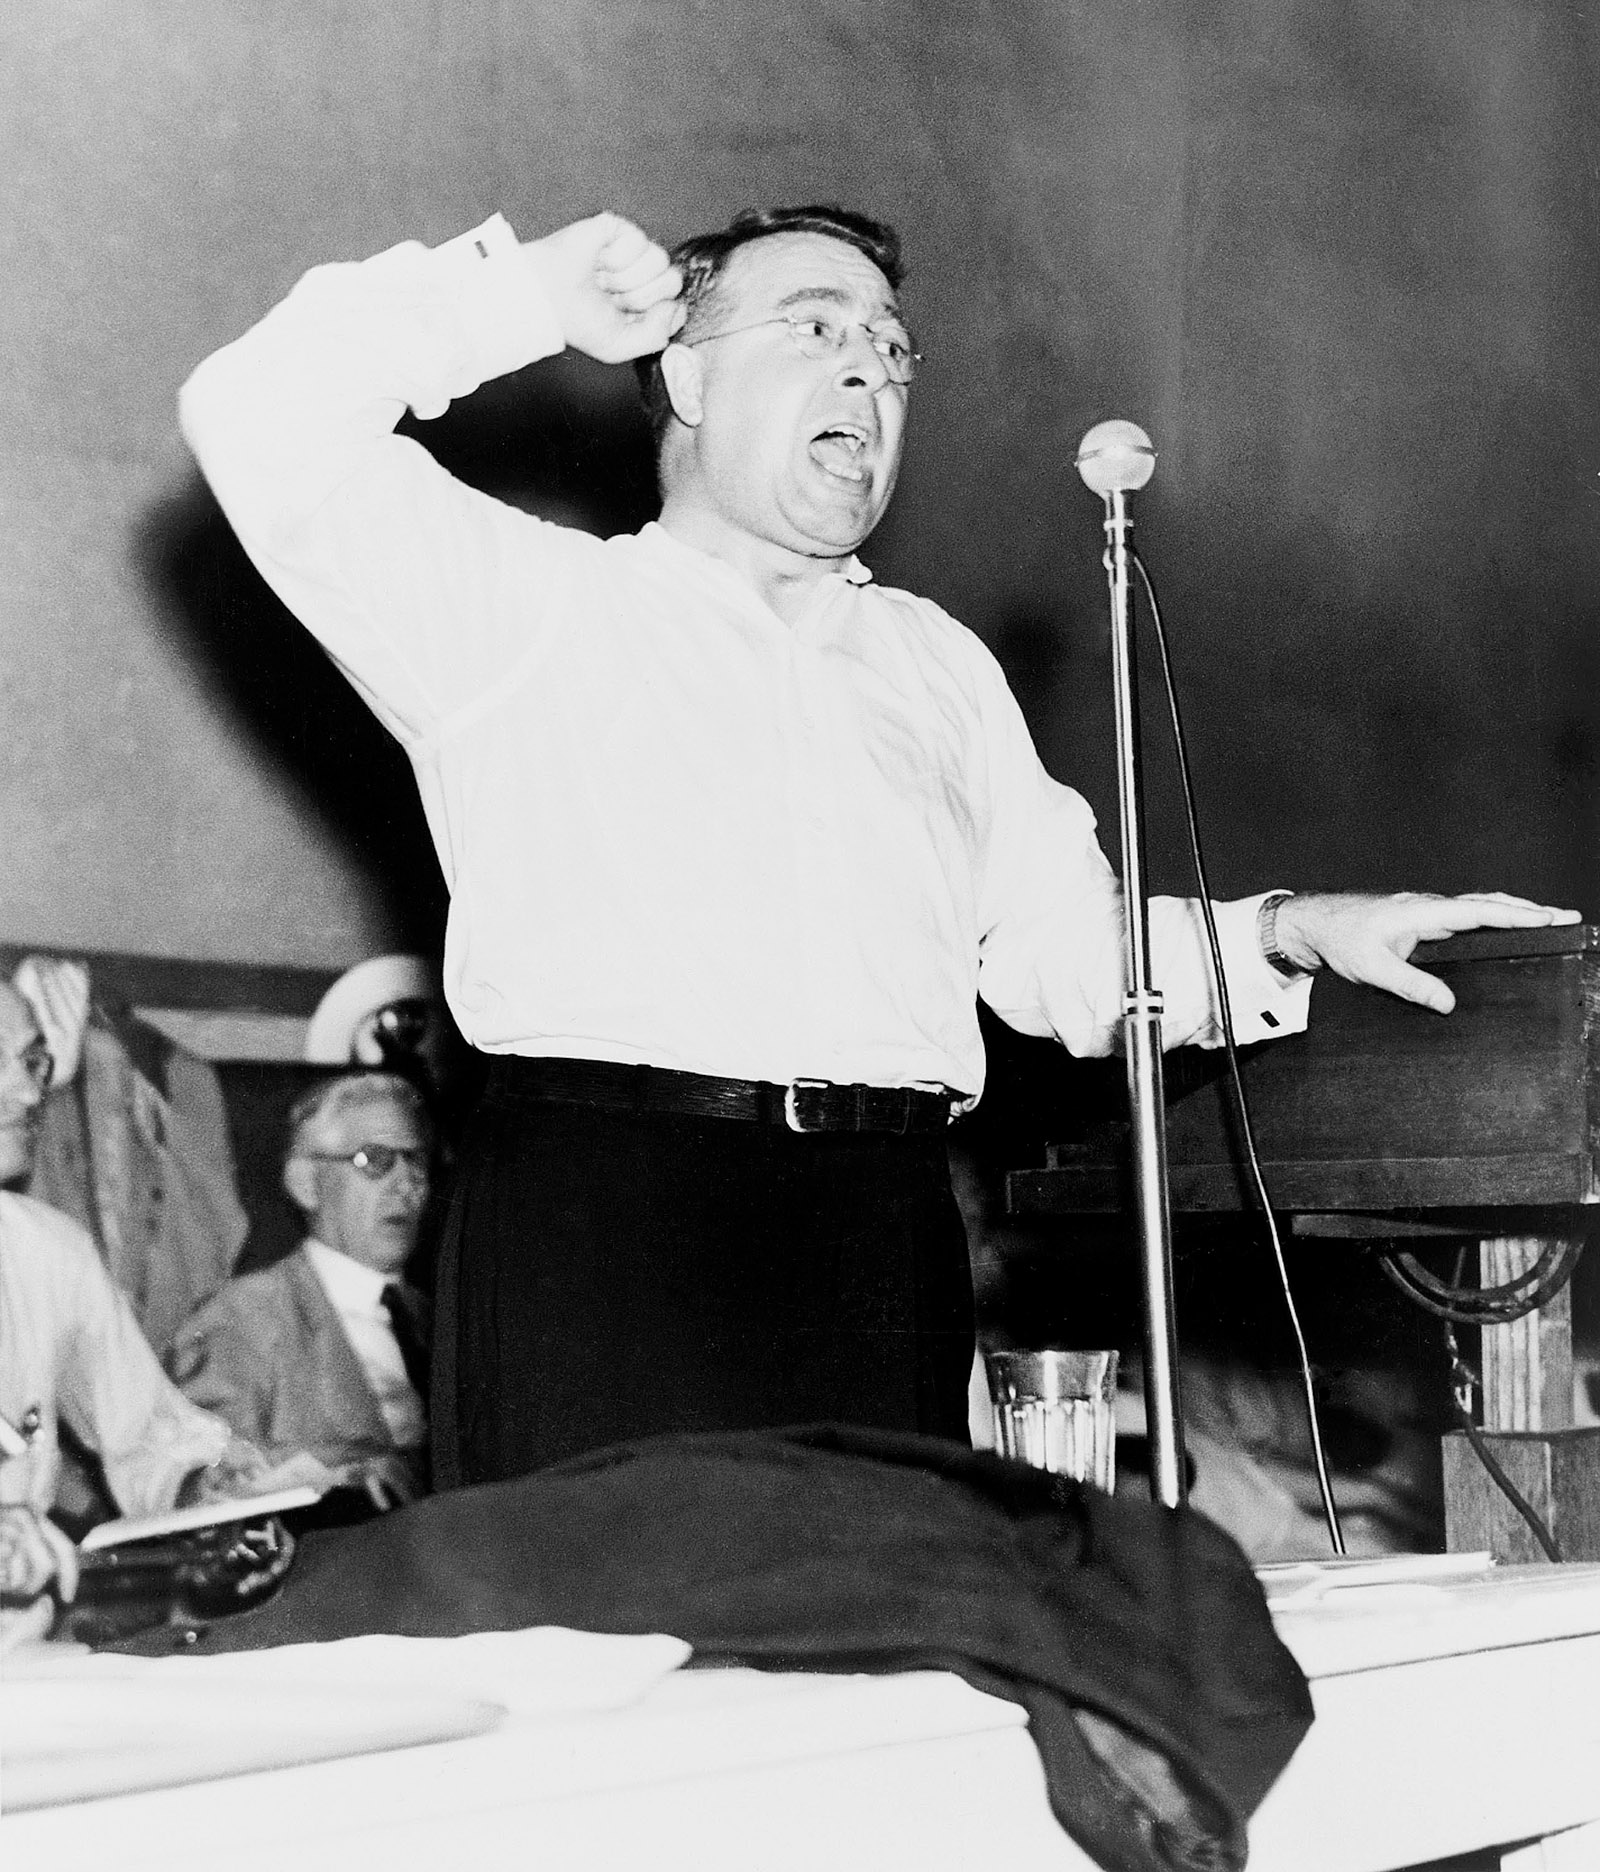 Father Charles Coughlin attacking the Roosevelt administration at the Townsend Convention, Cleveland, Ohio, July 1936